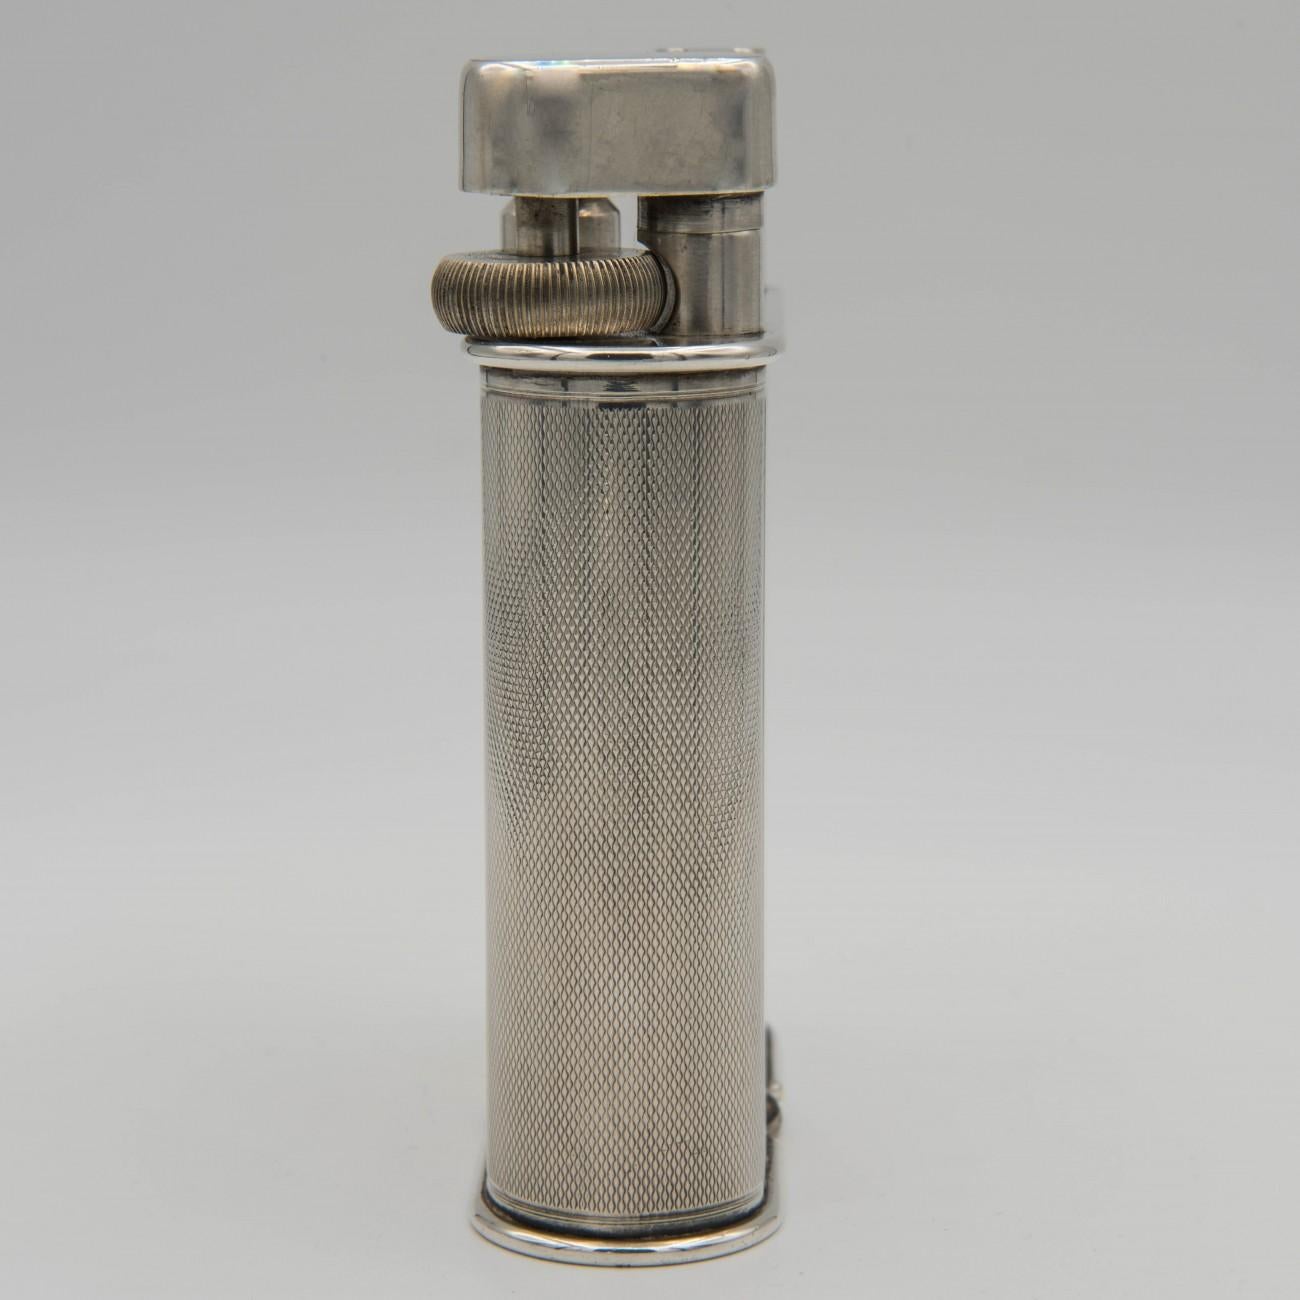 French Dunhill 'Giant' Lighter with Silver Plated Engine Turned Finish, circa 1948